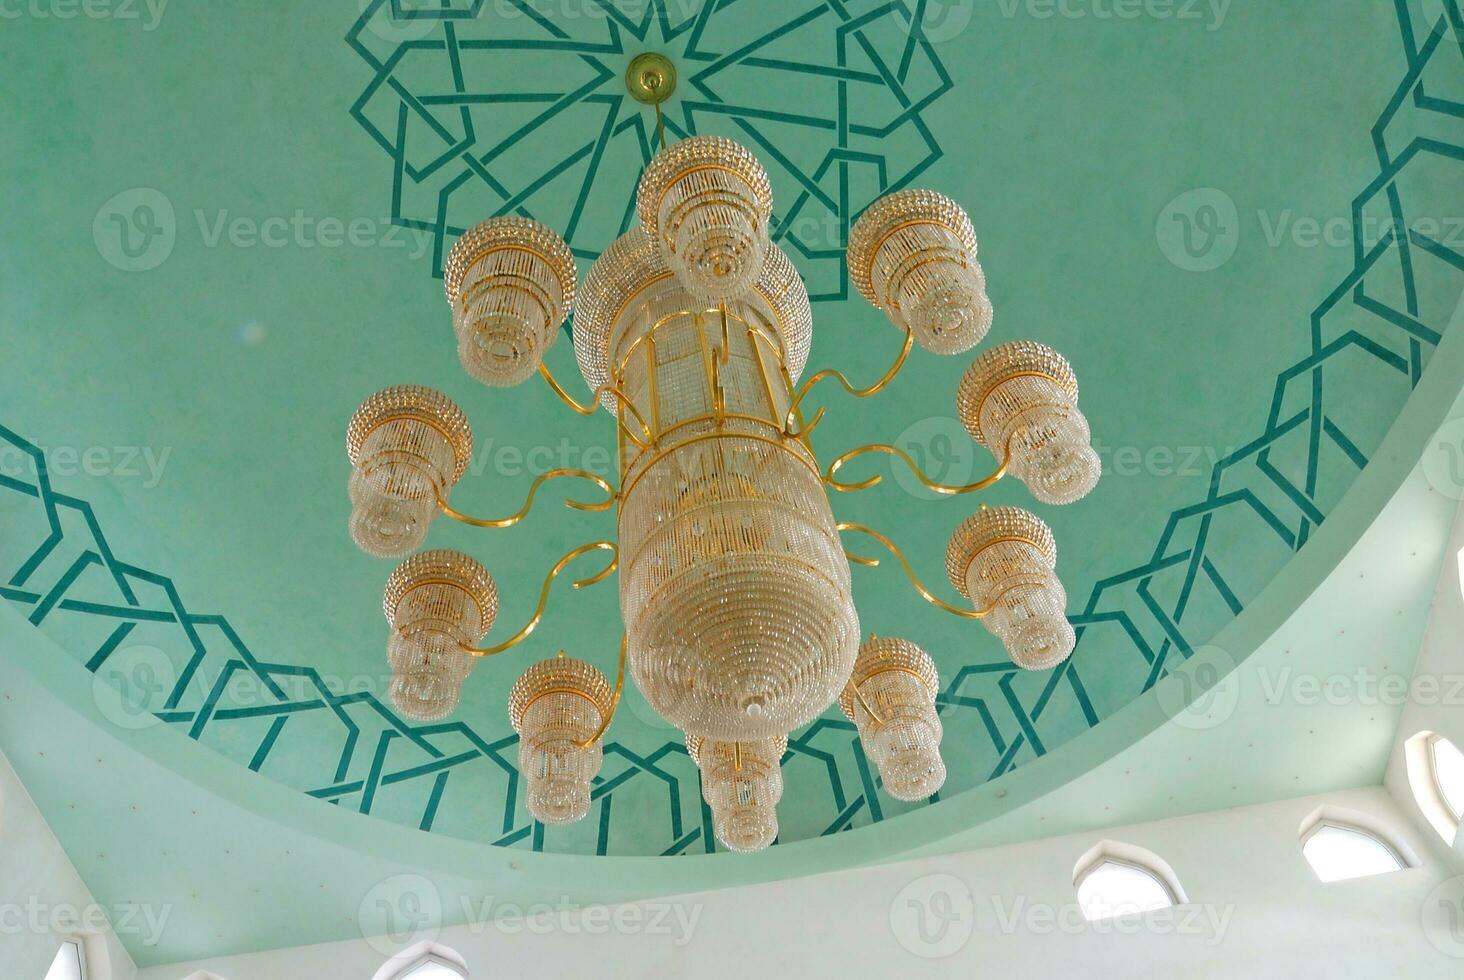 a chandelier in a mosque with a green ceiling photo